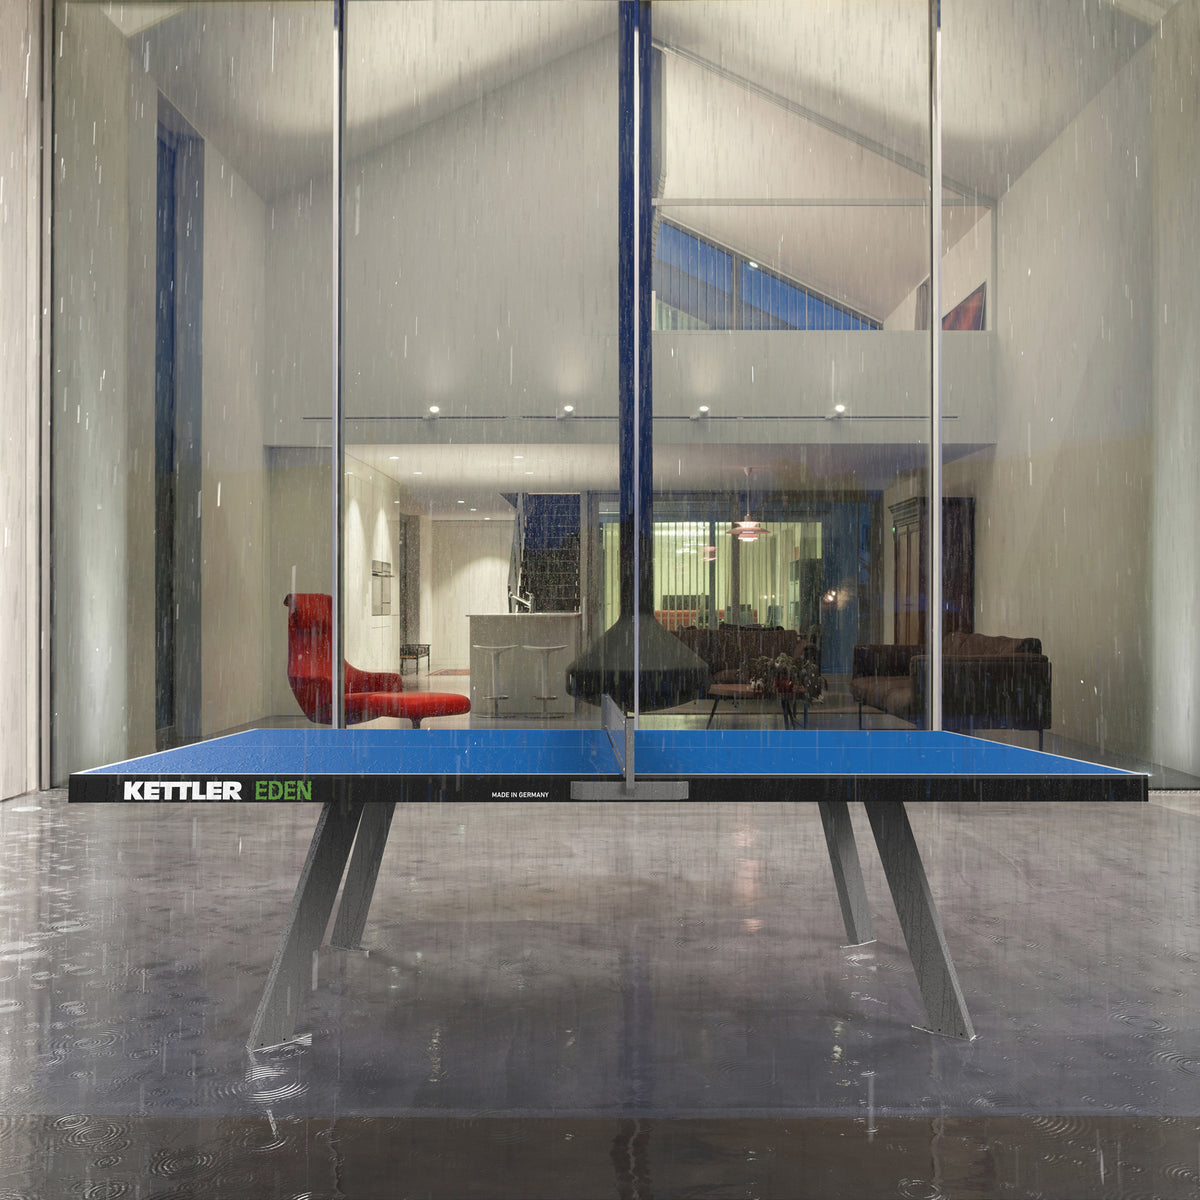 Eden outdoor table tennis table in the rain. Fully stationary and durable for year-round use.  weatherproof.